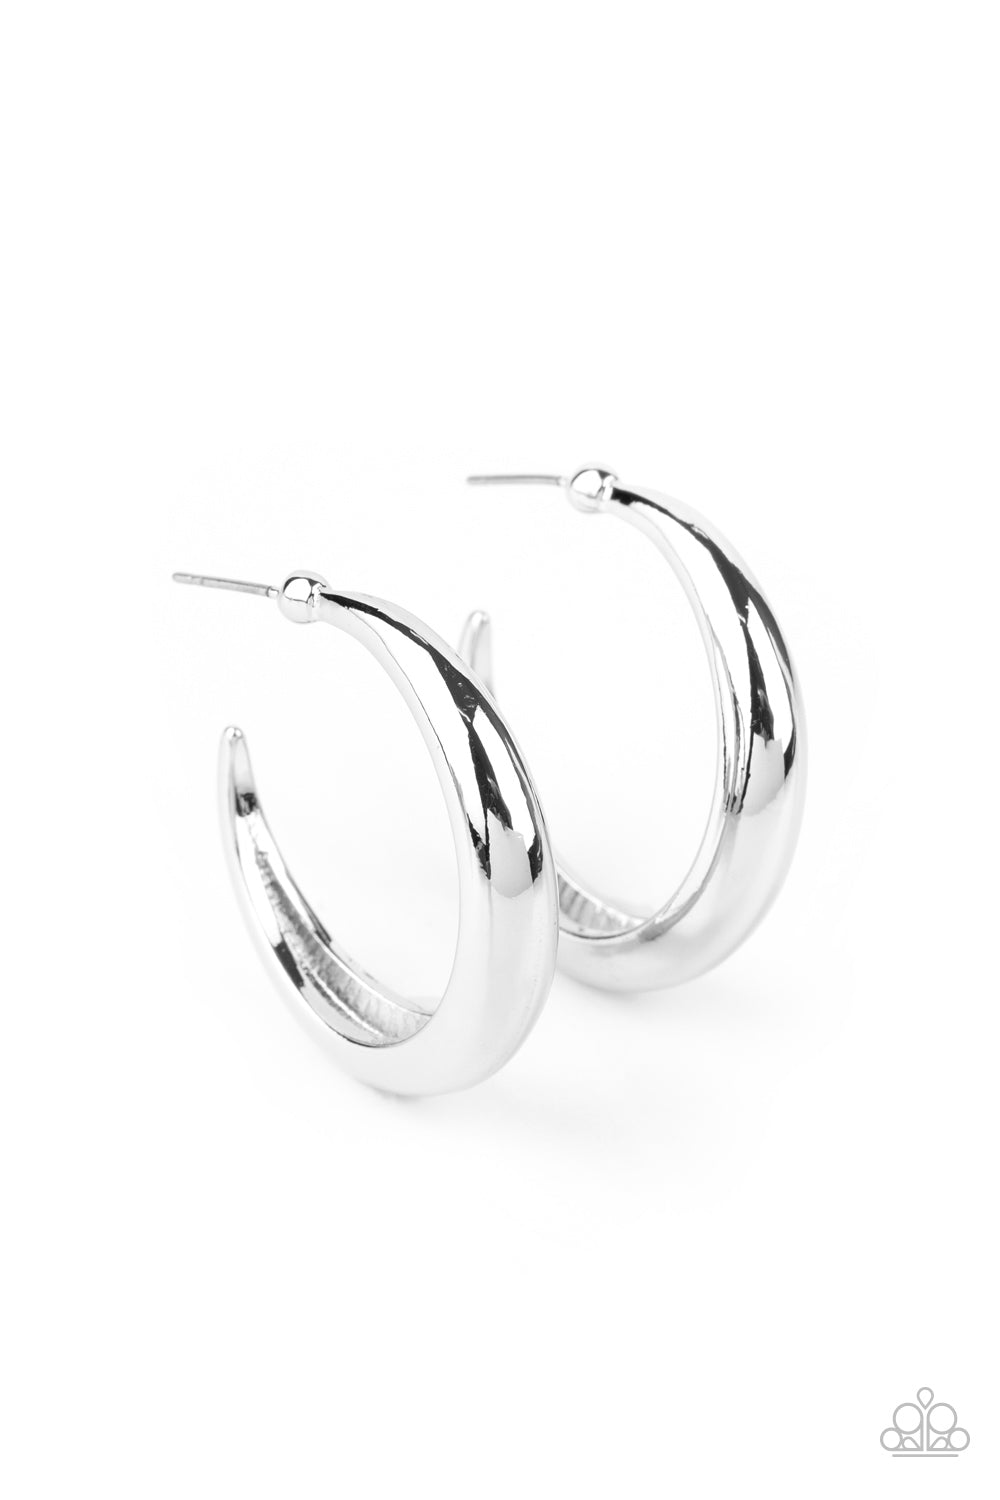 Lay It On Thick - silver - Paparazzi earrings